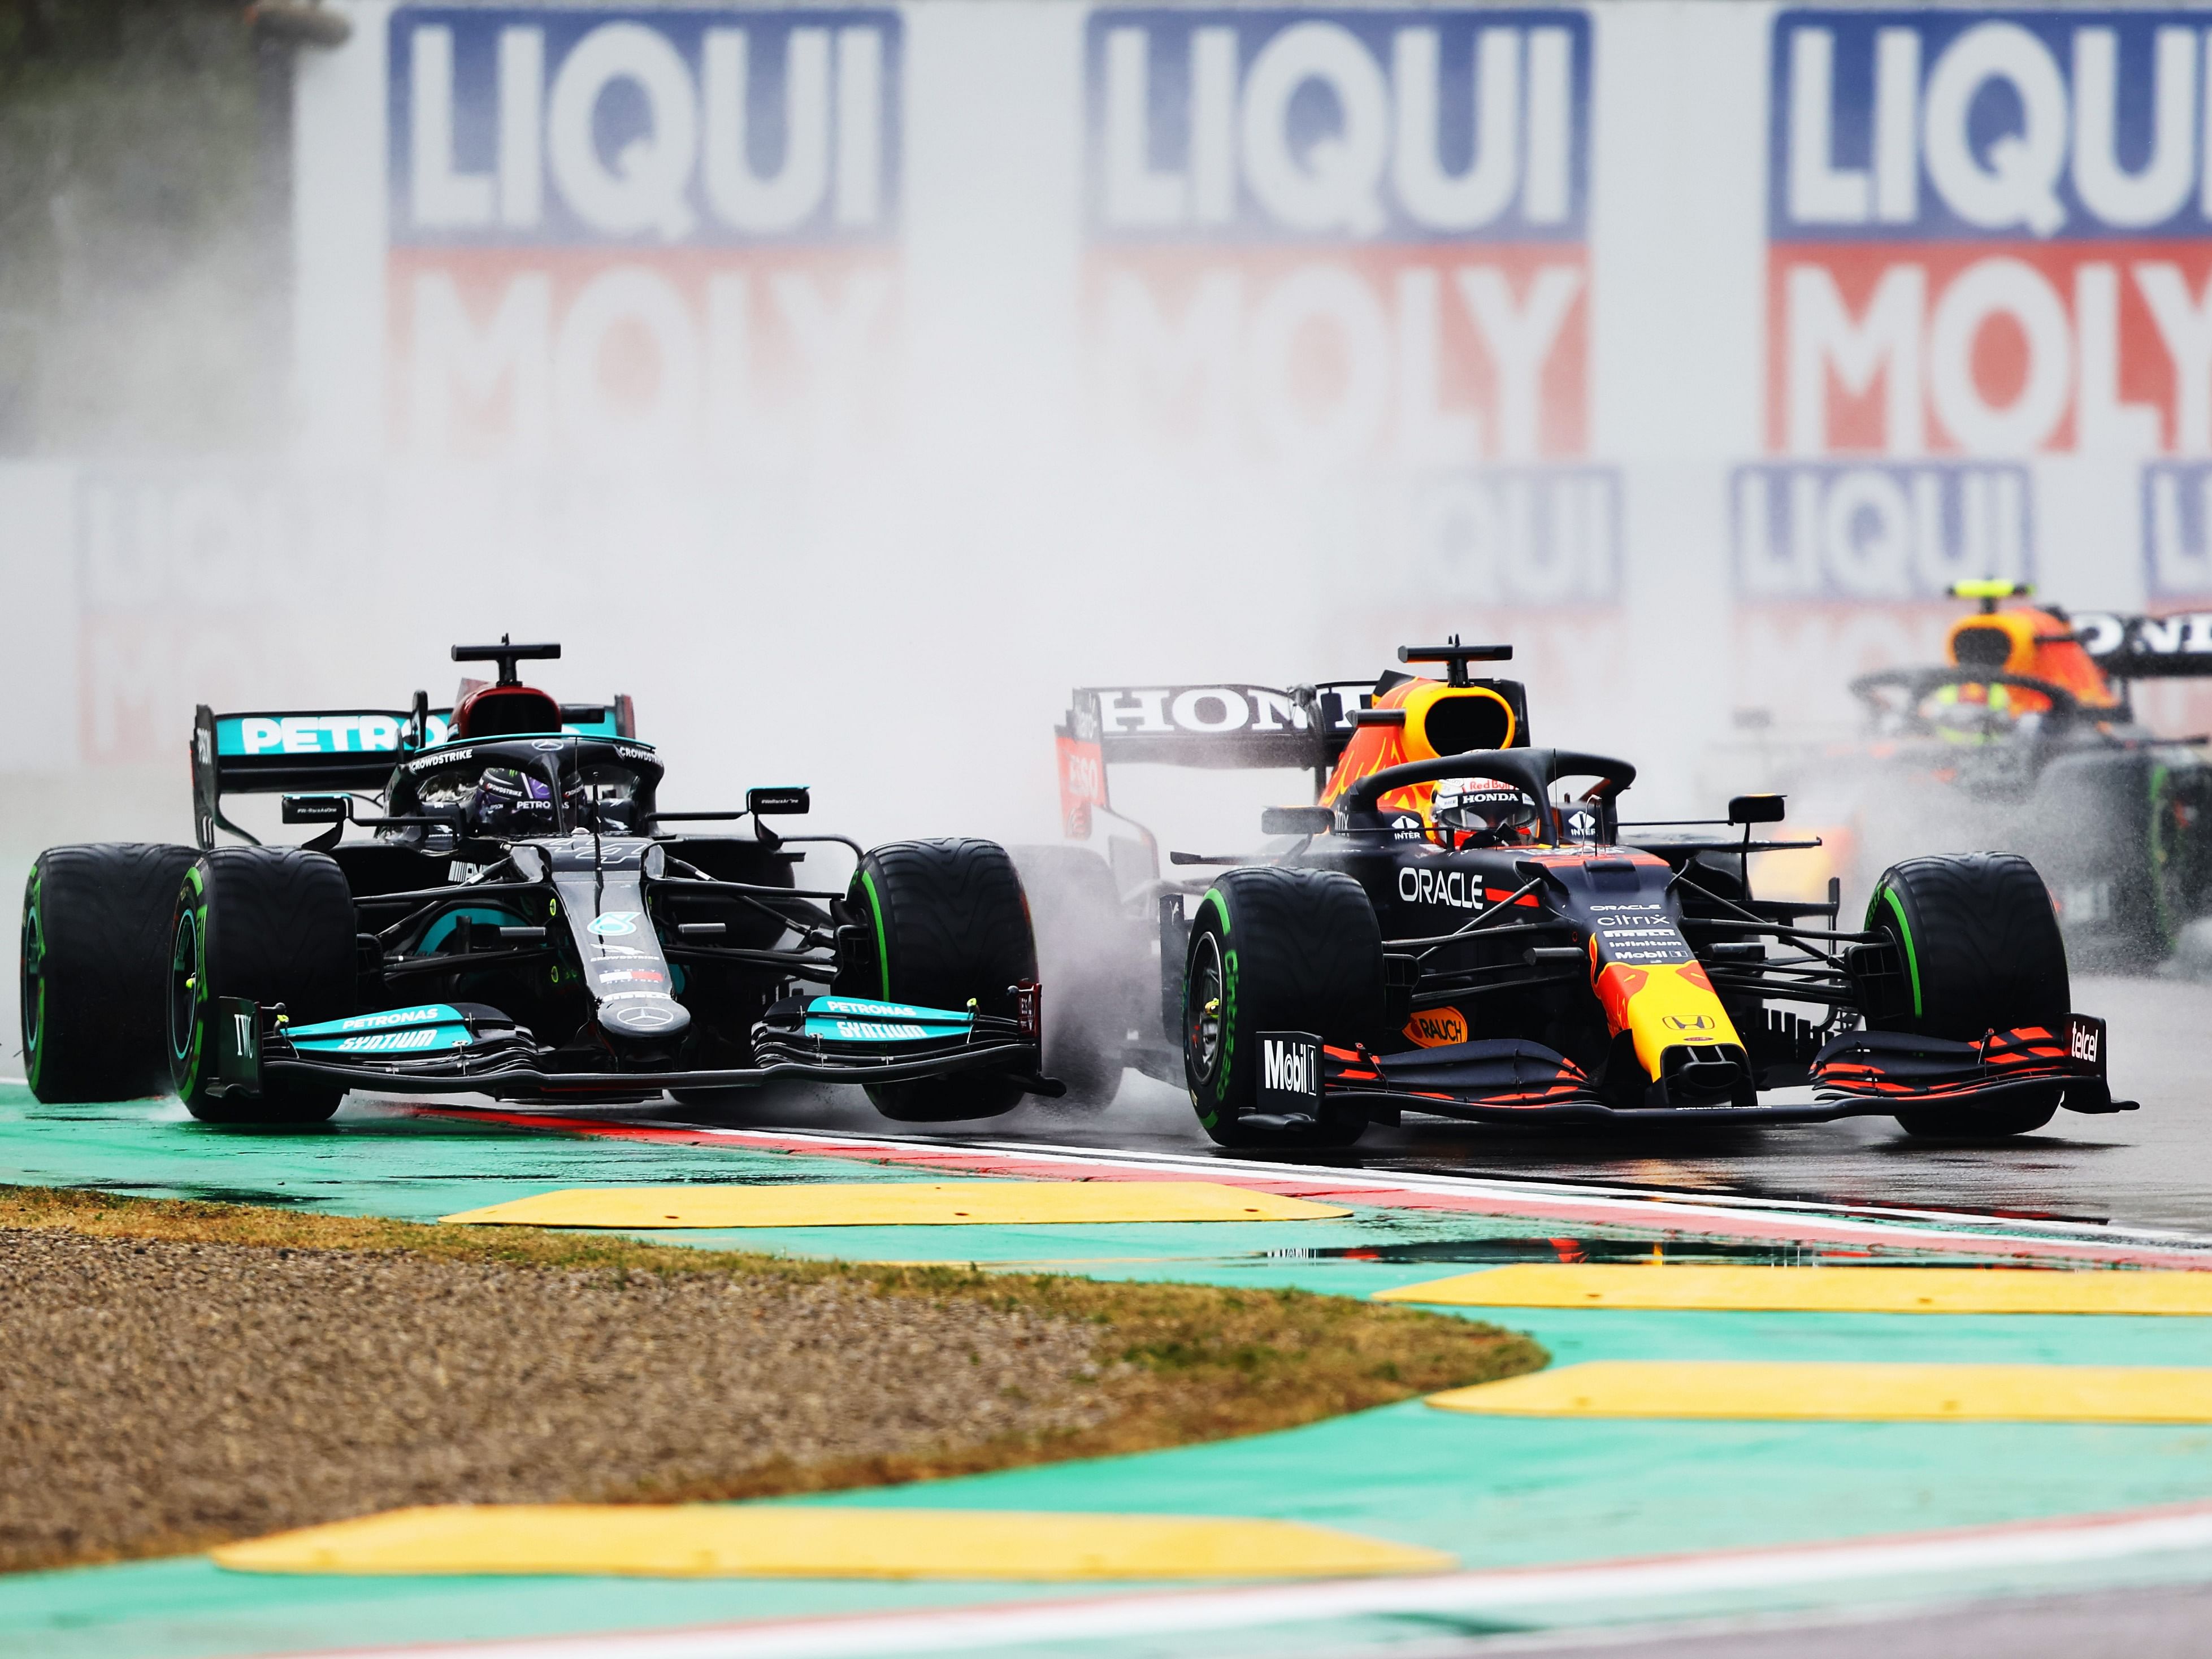 Lewis Hamilton (44) and Max Verstappen (33) at the start of the 2021 F1 Emilia Romagna Grand Prix. (Photo by Bryn Lennon/Getty Images)